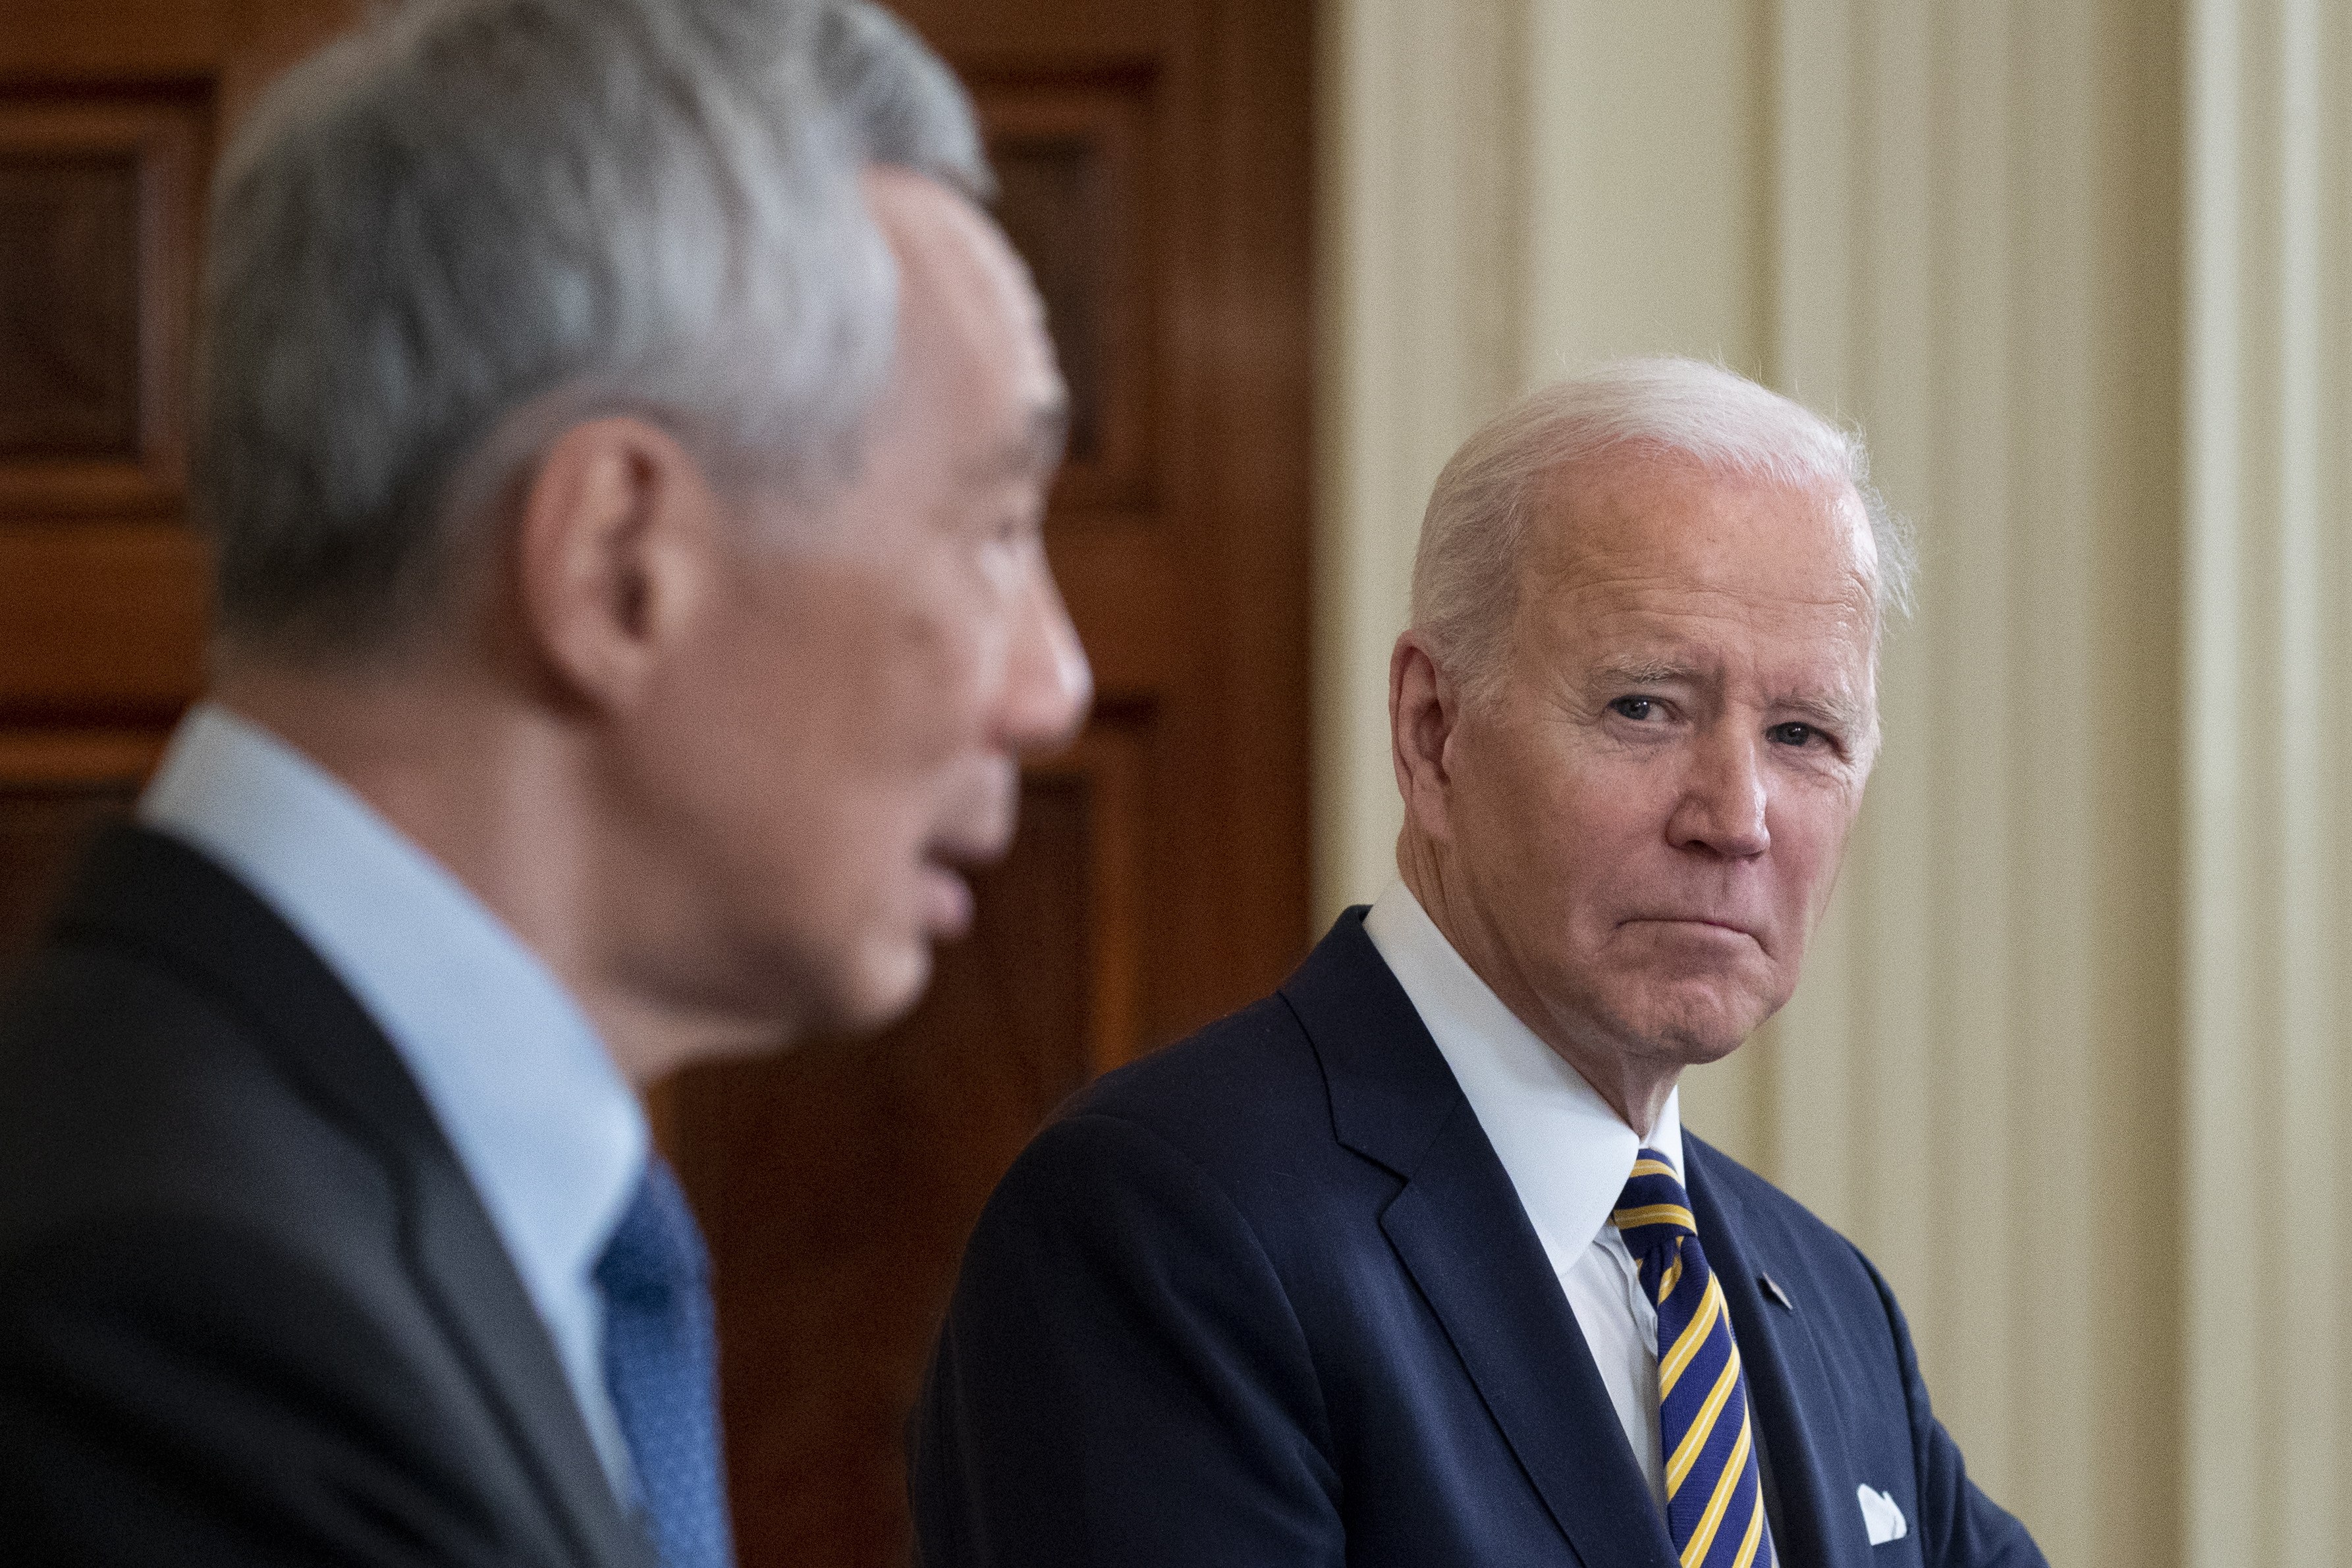 US President Joe Biden and Singapore Prime Minister Lee Hsien Loong at a joint press conference in Washington on March 29, 2022. Photo: EPA-EFE 